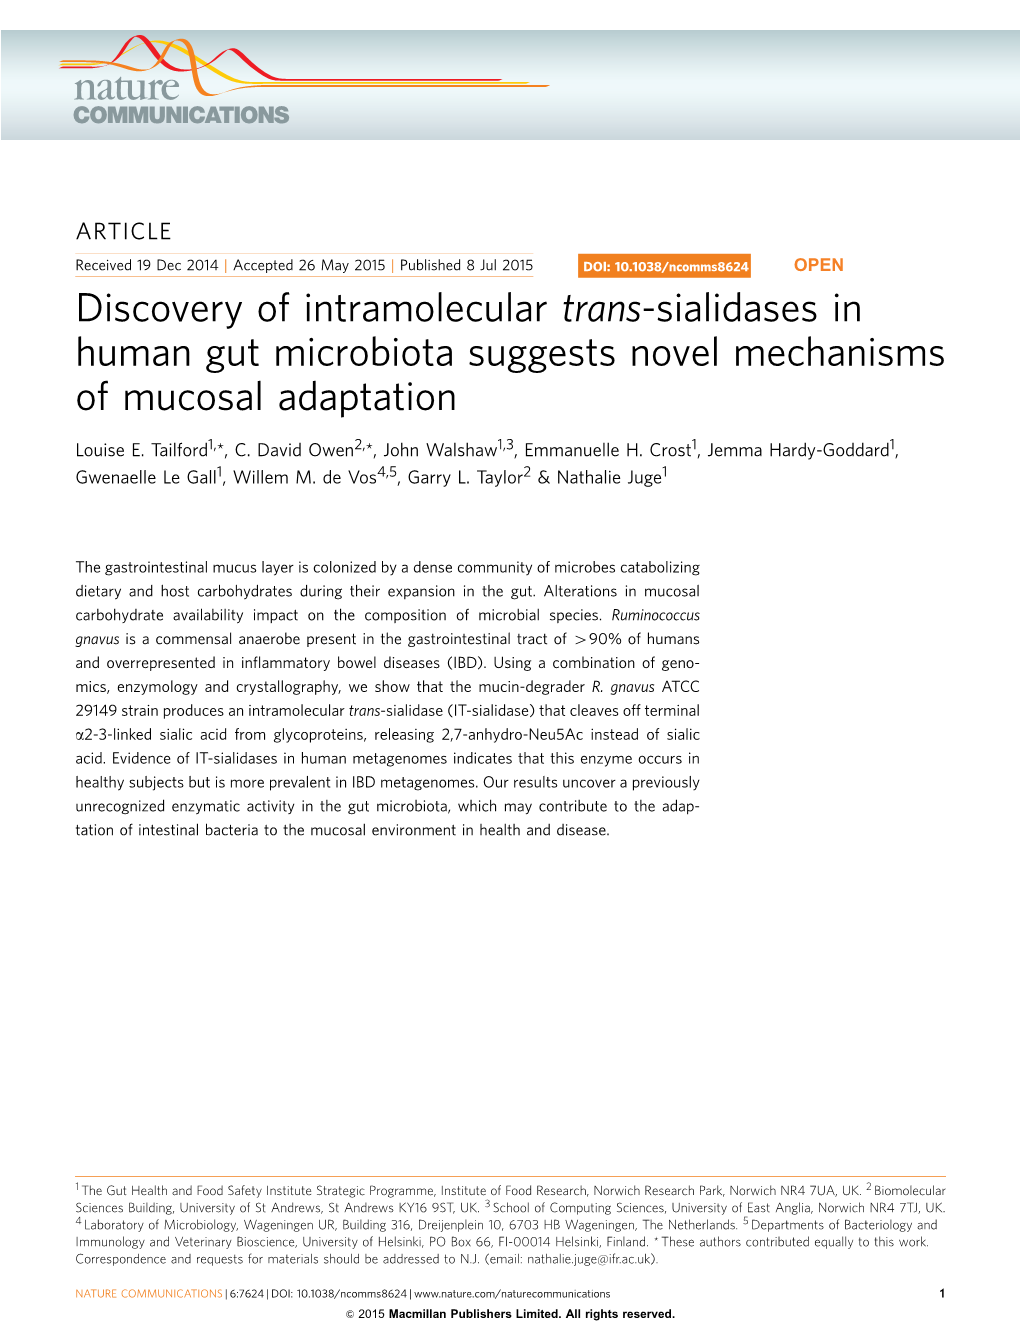 Discovery of Intramolecular Trans-Sialidases in Human Gut Microbiota Suggests Novel Mechanisms of Mucosal Adaptation